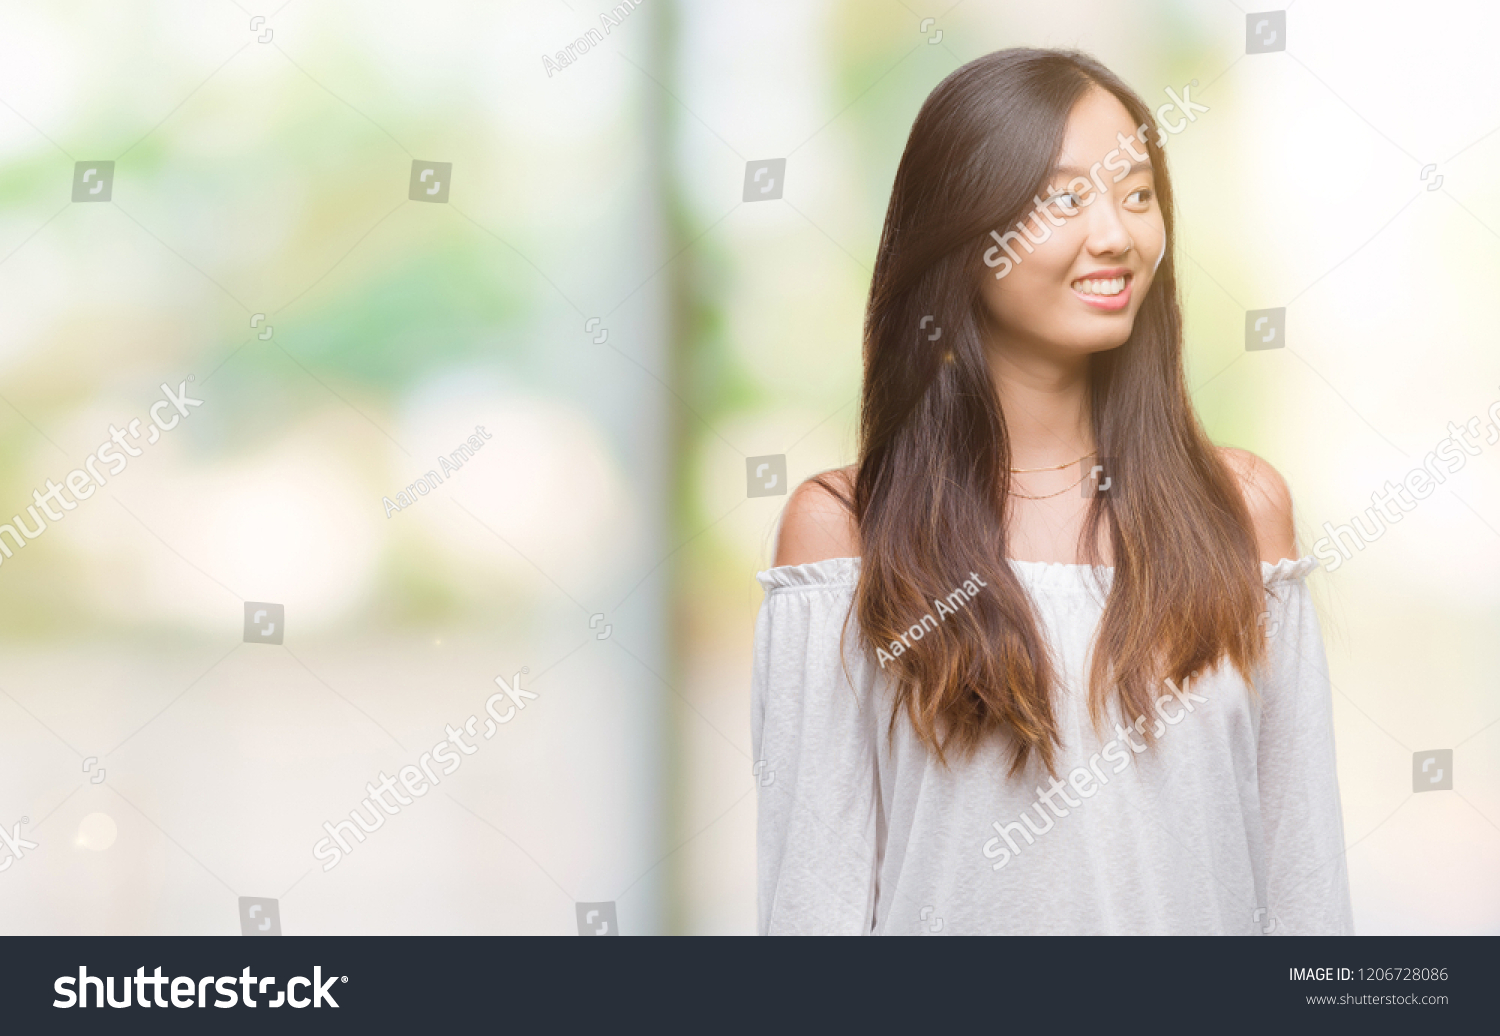 Young asian woman over isolated background smiling looking side and staring away thinking. #1206728086